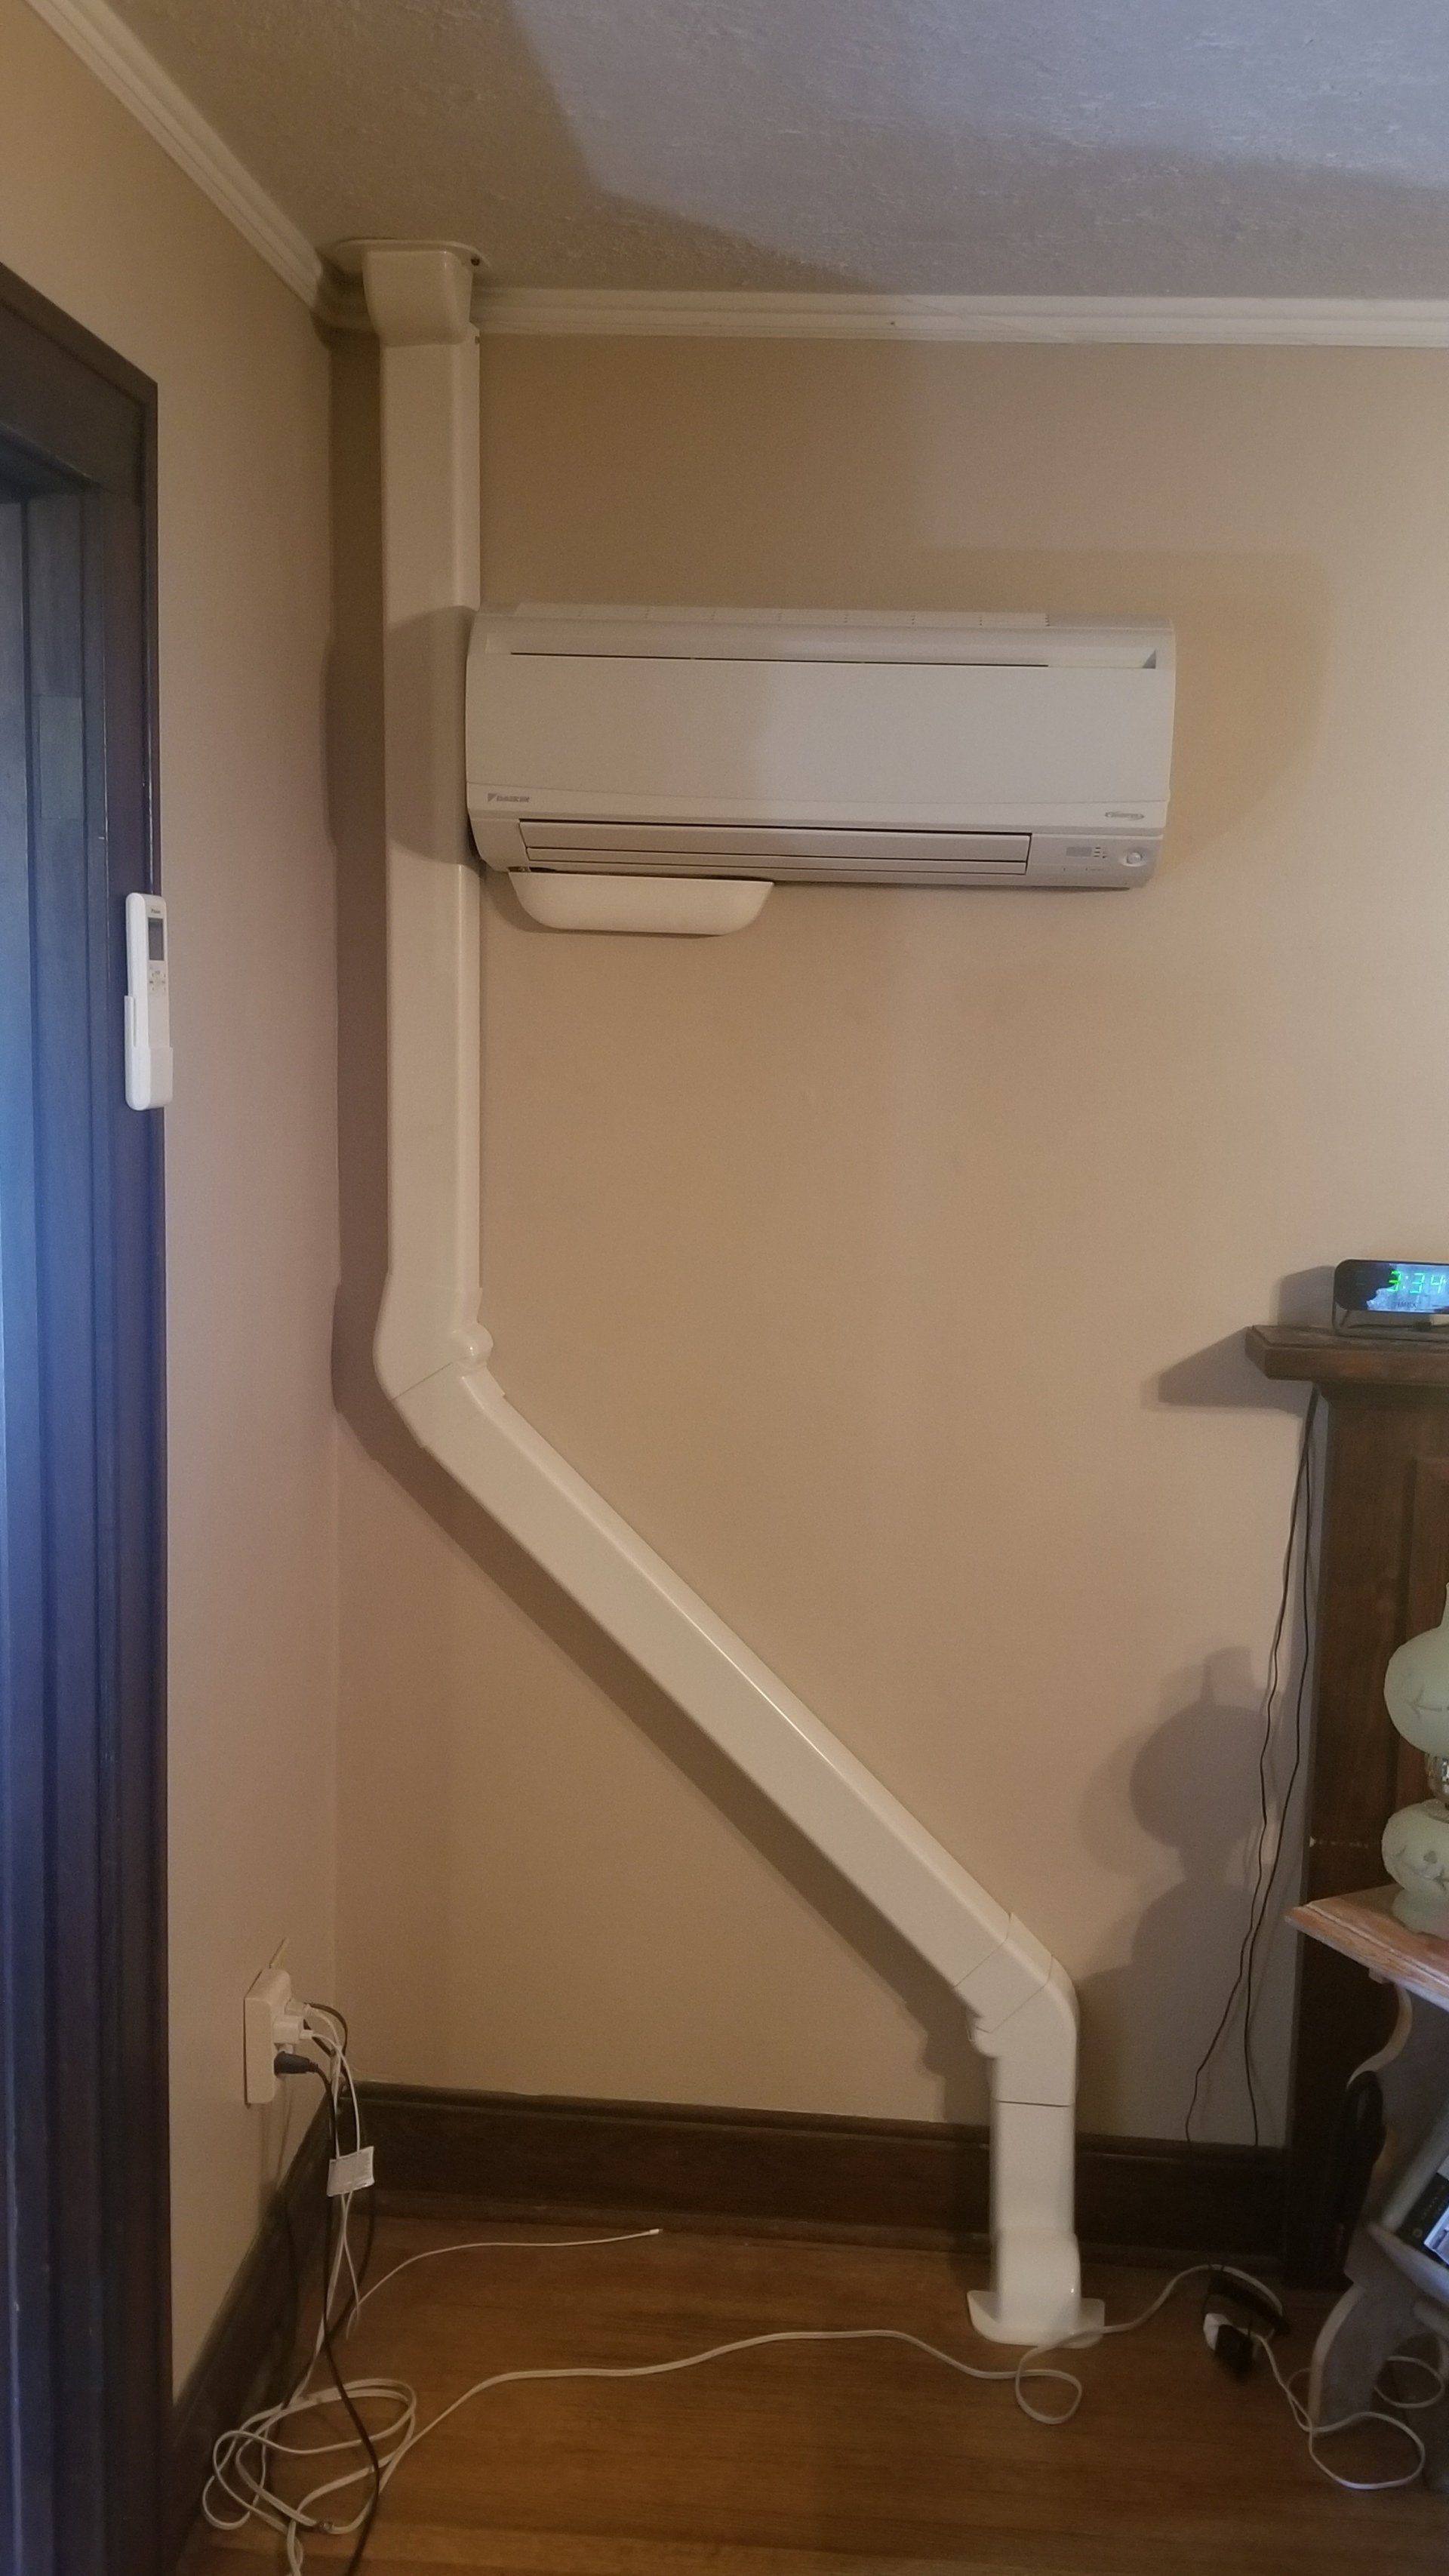 Air Conditioning Repair and Maintenance Near You